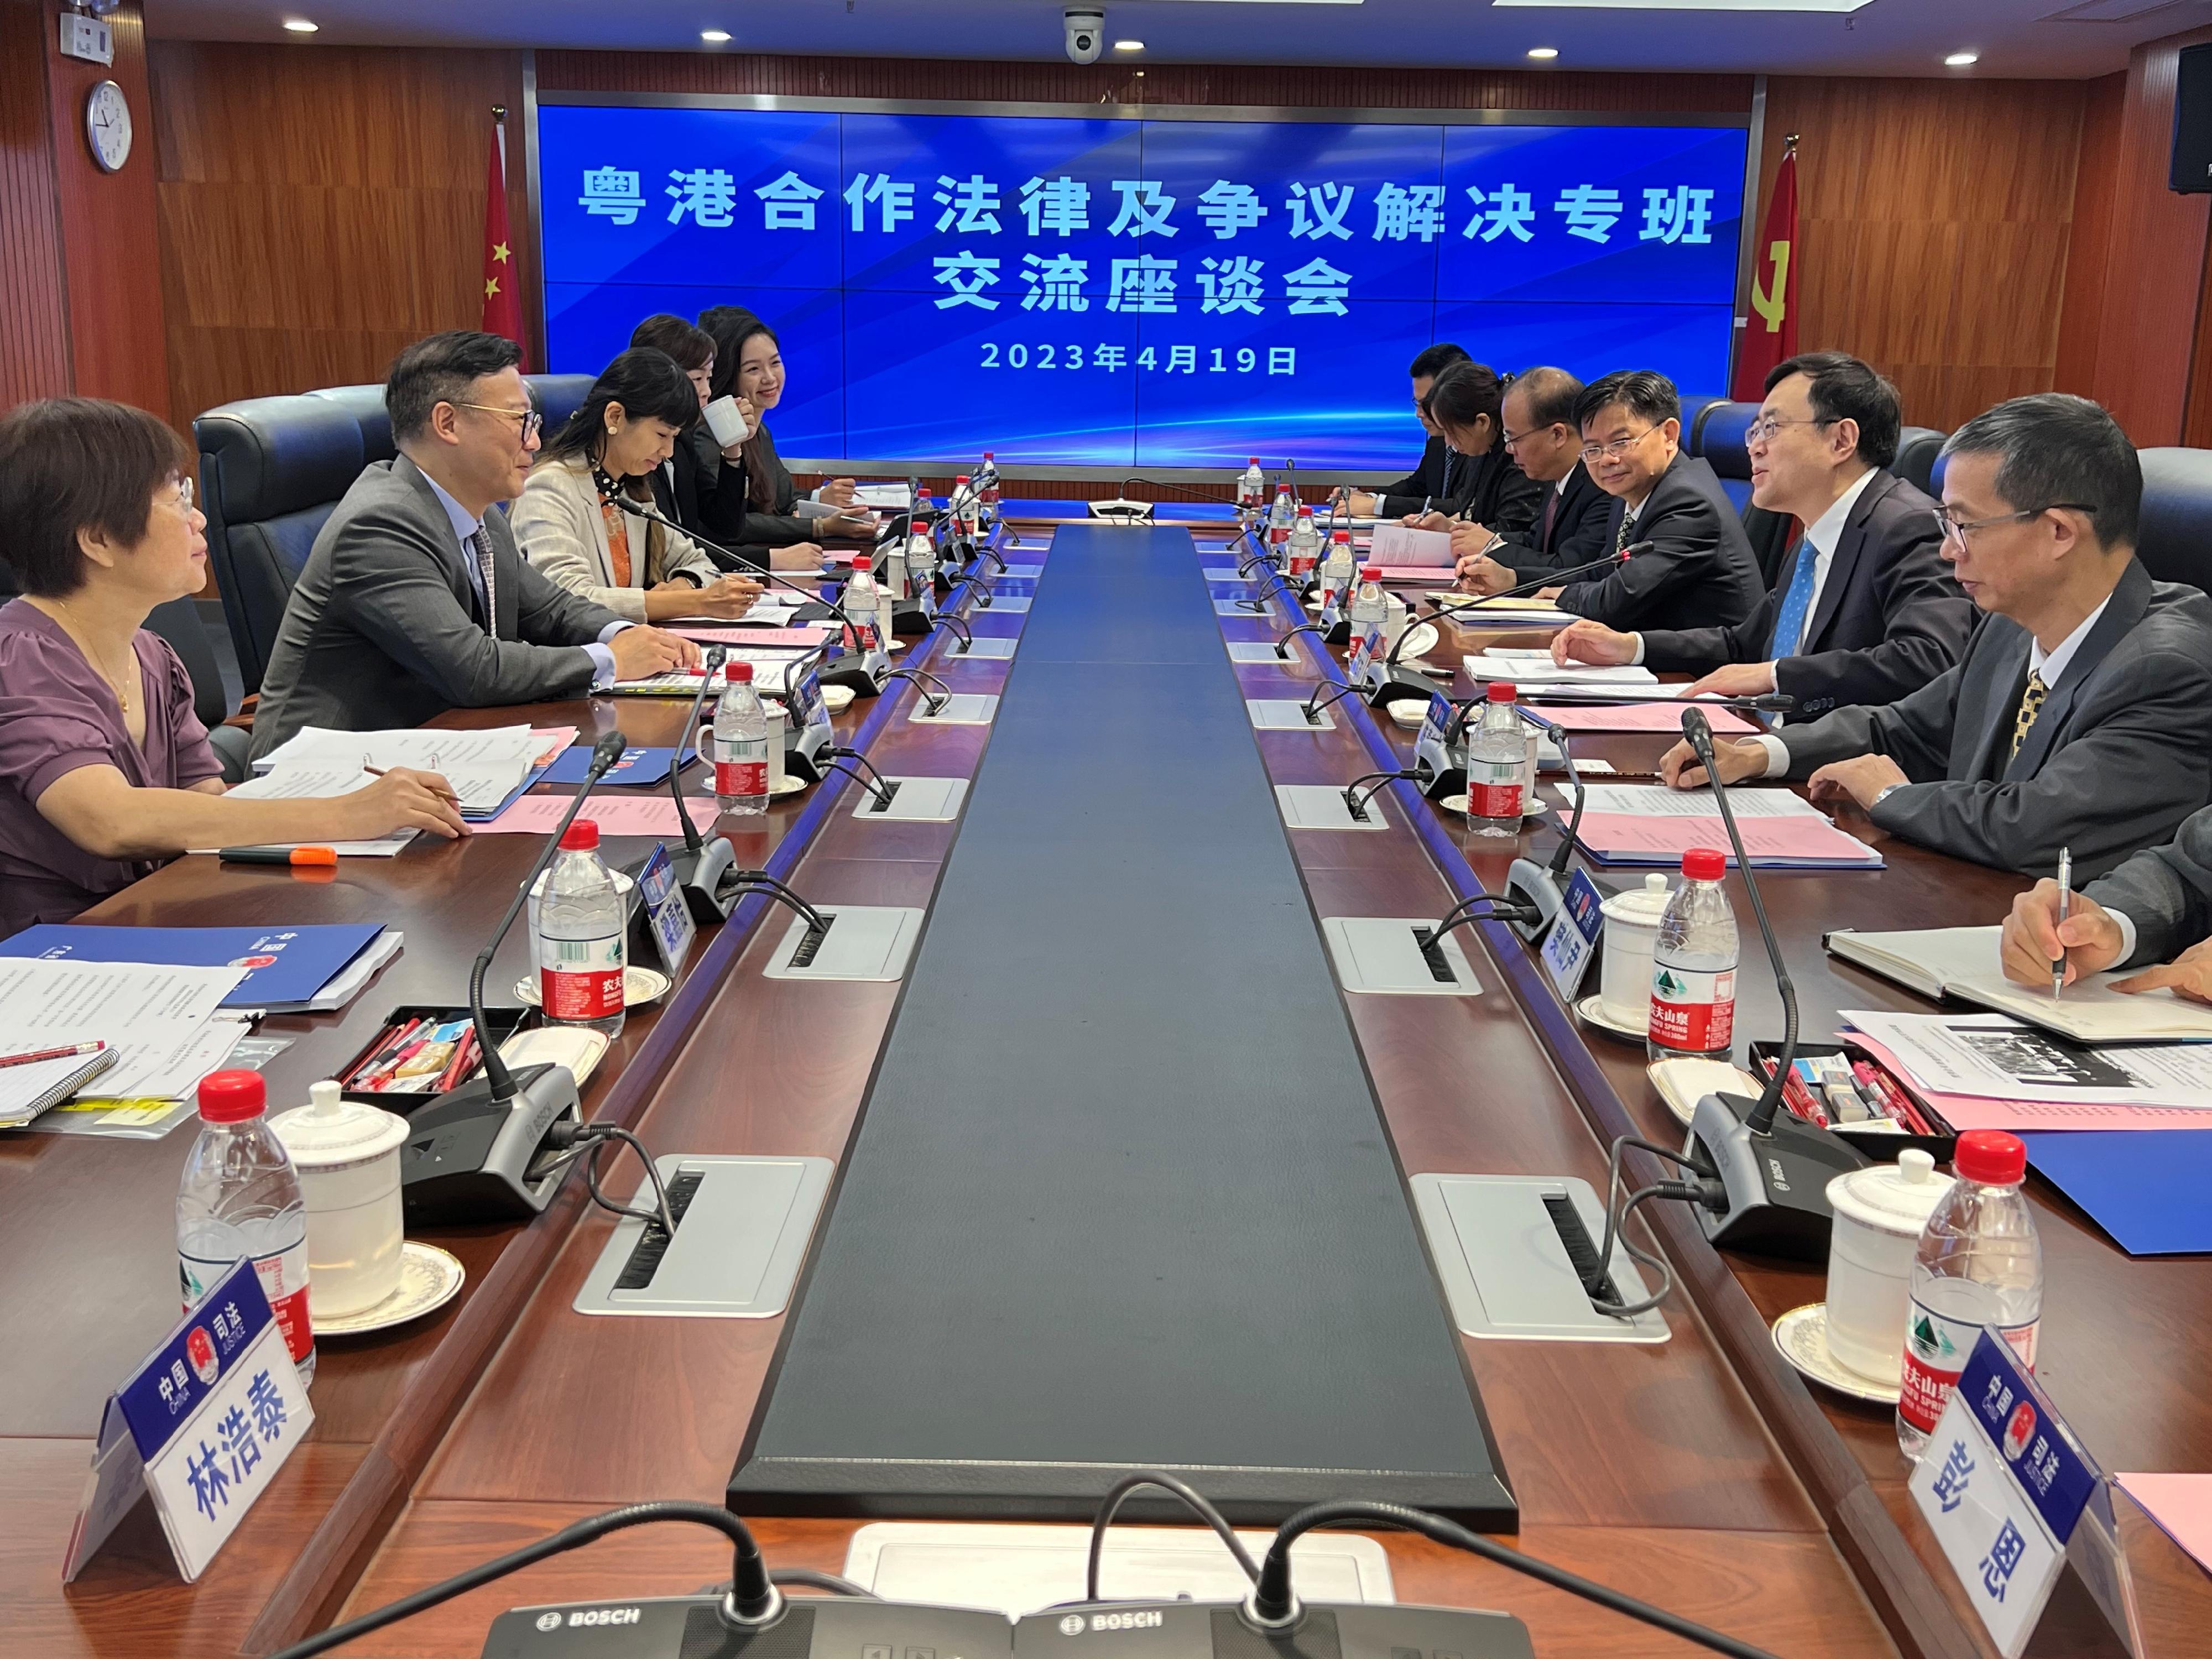 The Deputy Secretary for Justice, Mr Cheung Kwok-kwan, called on the Department of Justice of Guangdong Province today (April 19) in Guangzhou to discuss further collaboration on legal and dispute resolutions in the Guangdong-Hong Kong-Macao Greater Bay Area. Photo shows Mr Cheung (second left) with the Director-General of the Department of Justice of Guangdong Province, Mr Chen Xudong (second right), and other senior officers in the meeting.